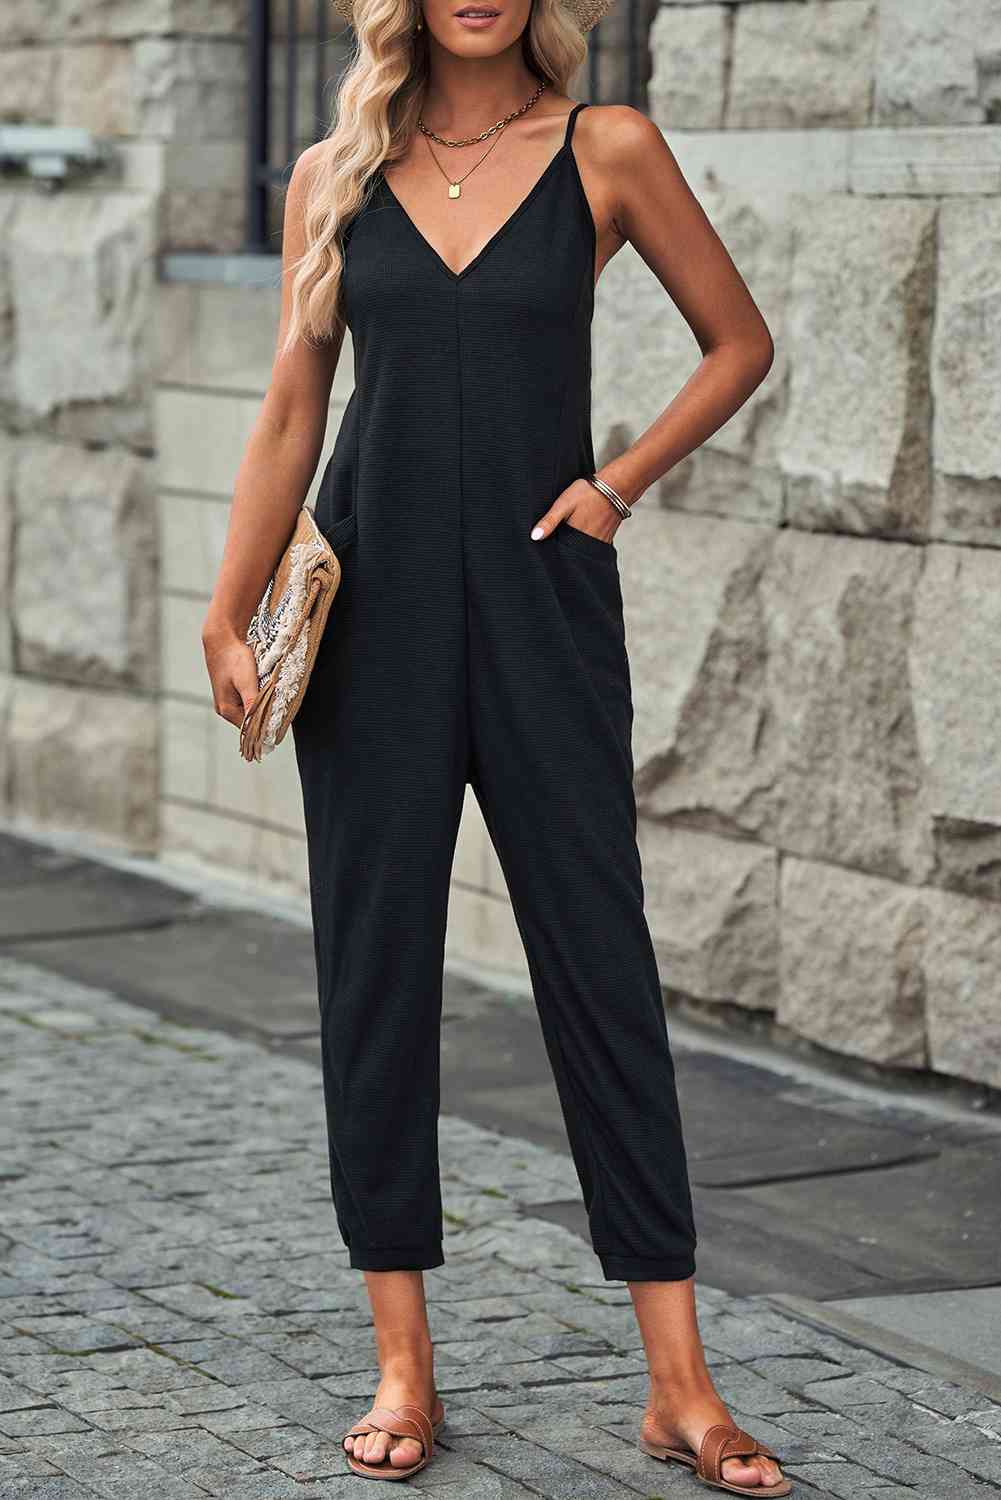 The Blake Spaghetti Strap Deep V Jumpsuit with Pockets